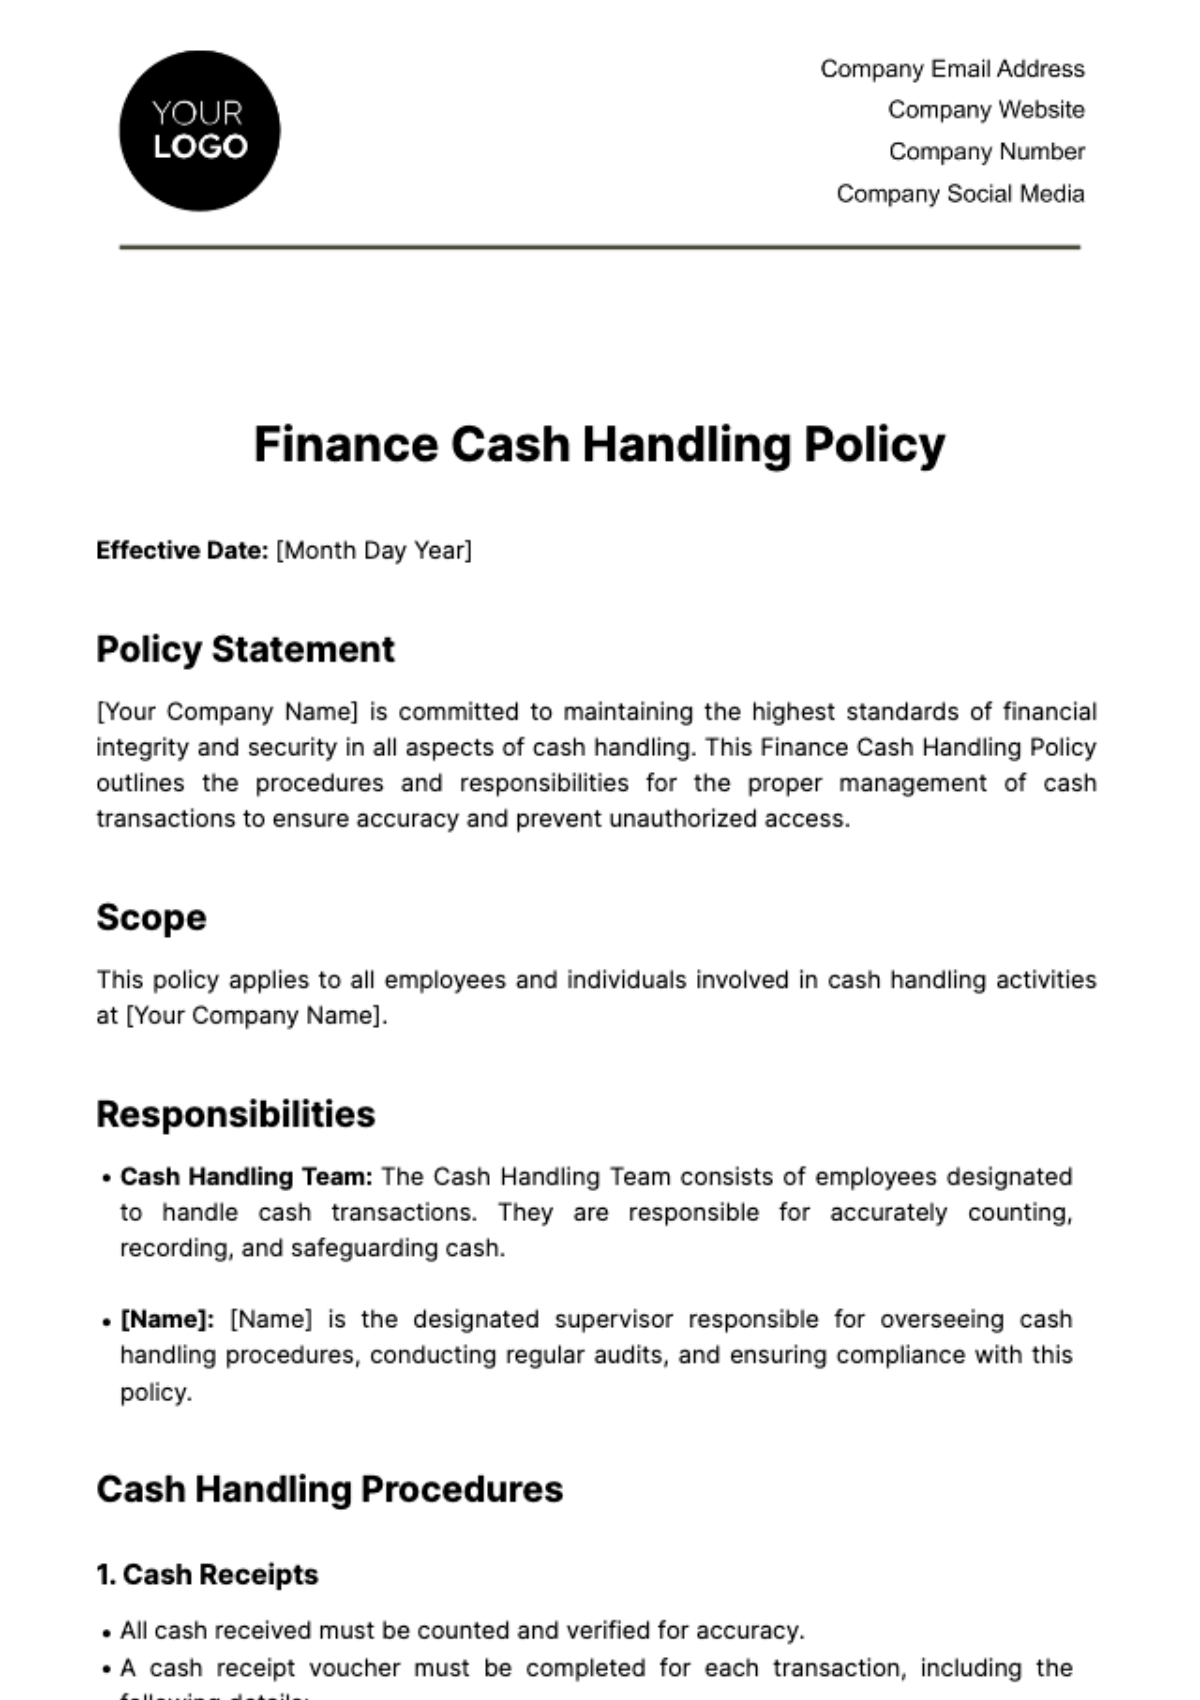 Finance Cash Handling Policy Template